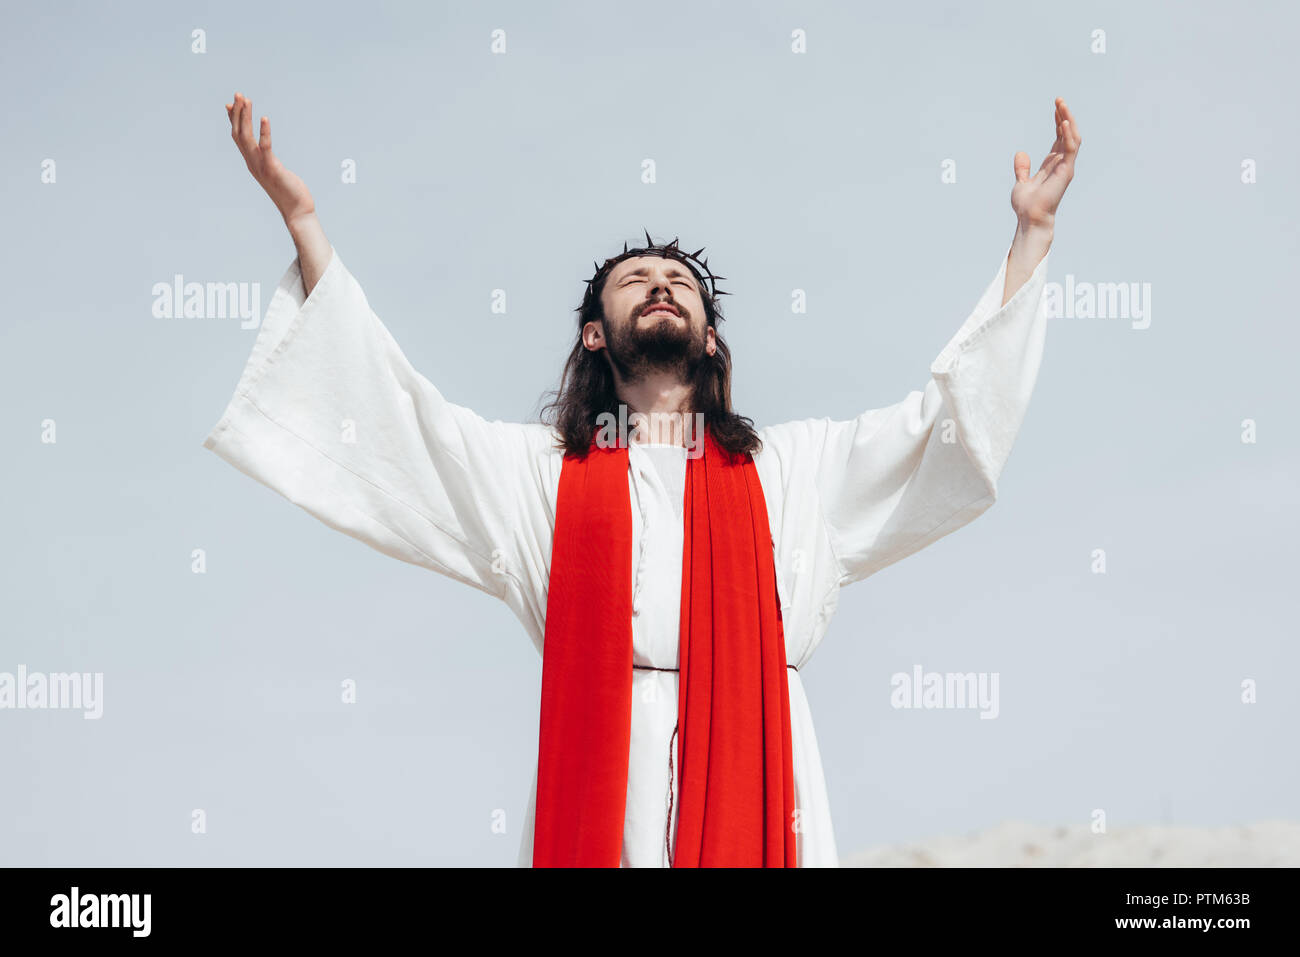 Jesus in robe, red sash and crown of thorns standing with raised hands and praying in desert Stock Photo